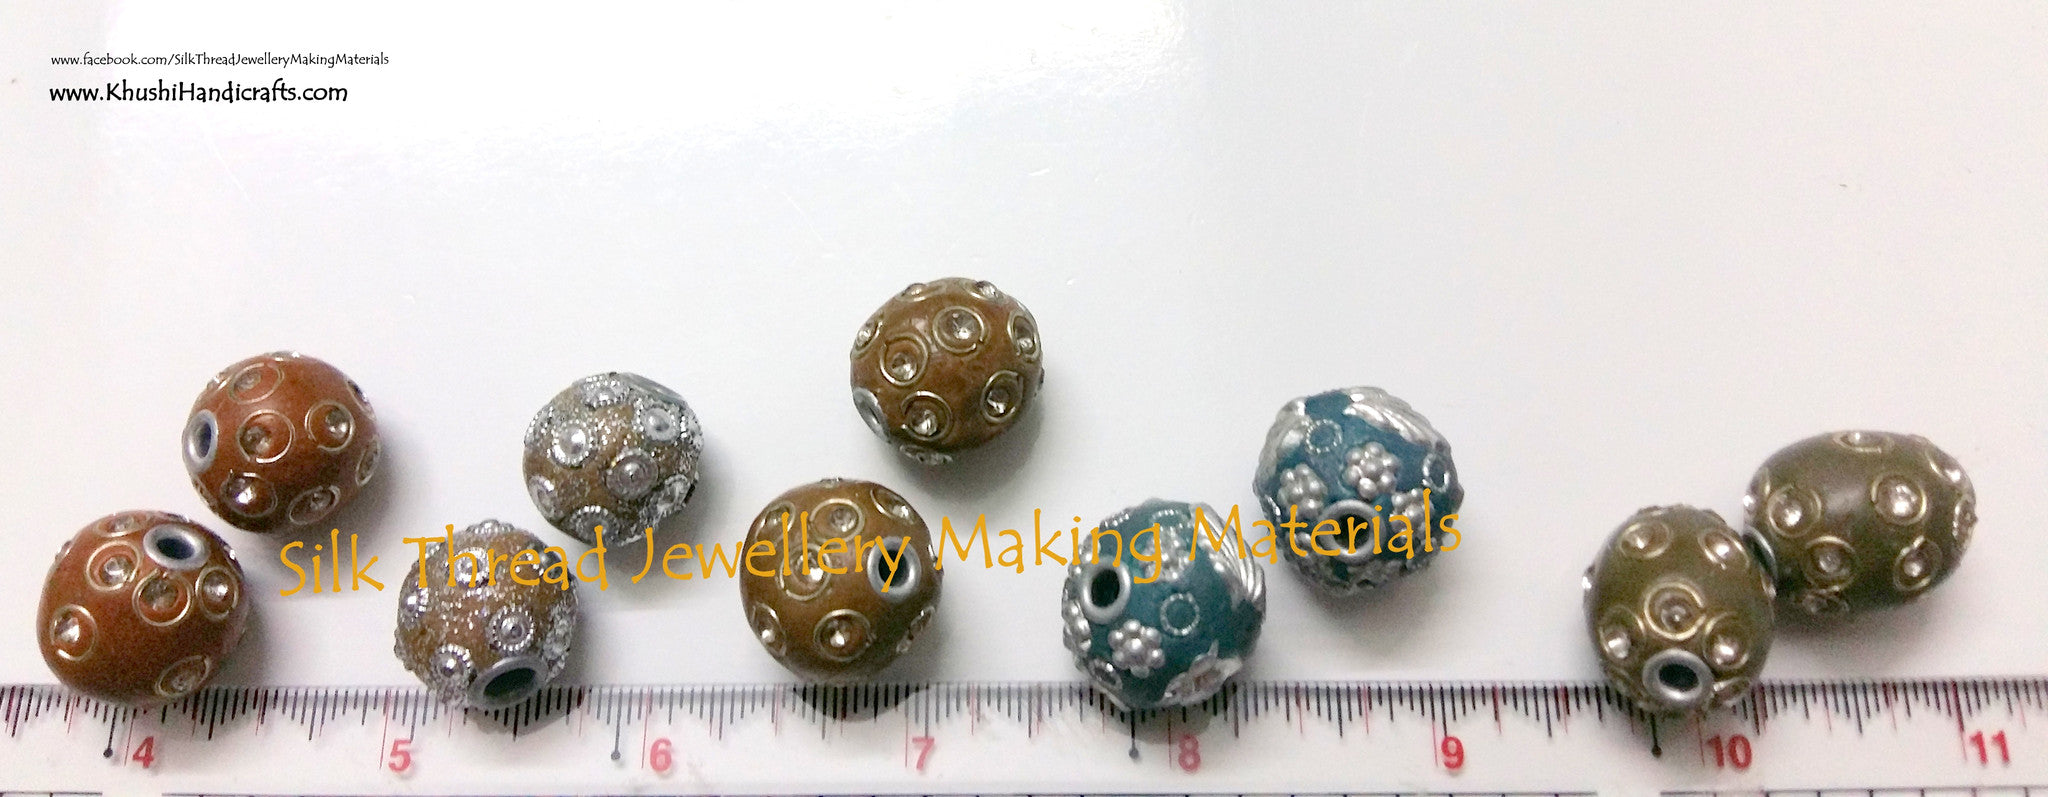 Combo of 5 pairs of Designer Handcrafted Beads.Jewellery Materials